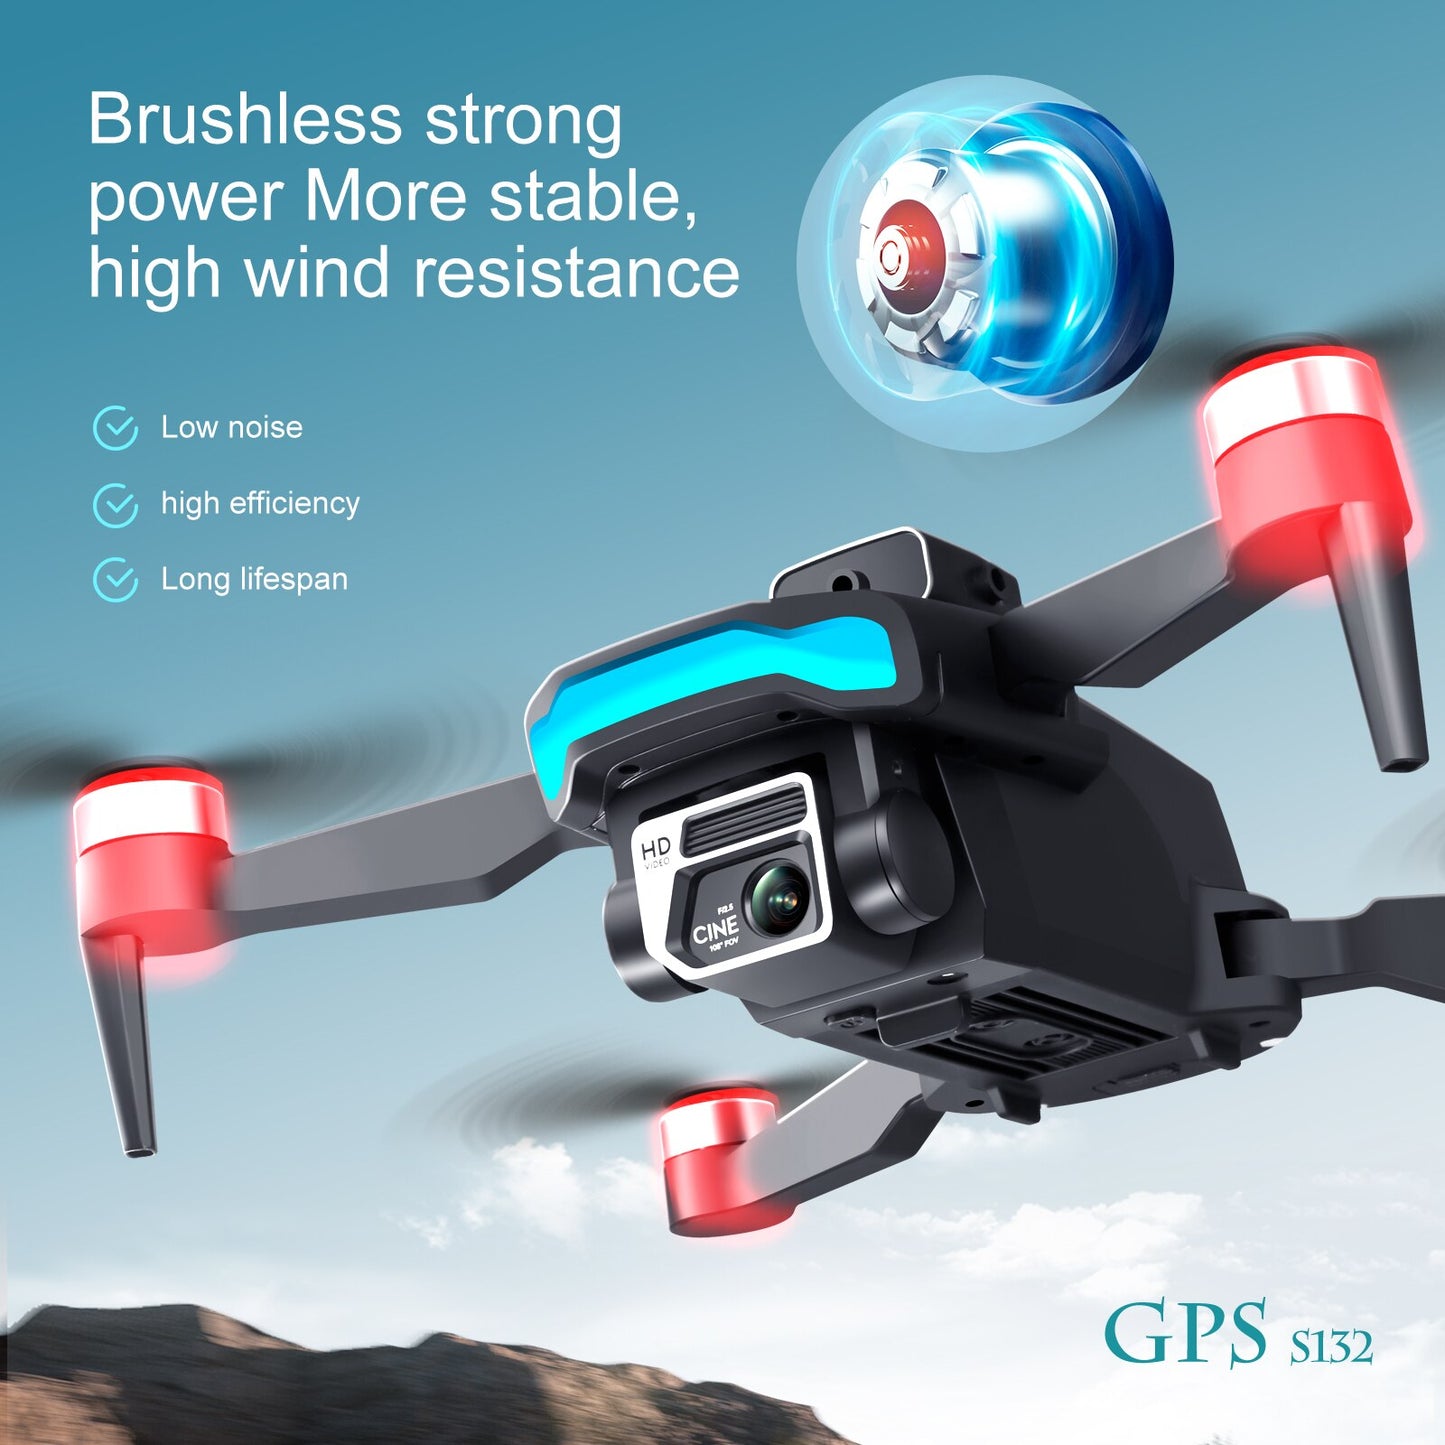 S132 Drone, Brushless strong power More stable, high wind resistance Low noise high efficiency